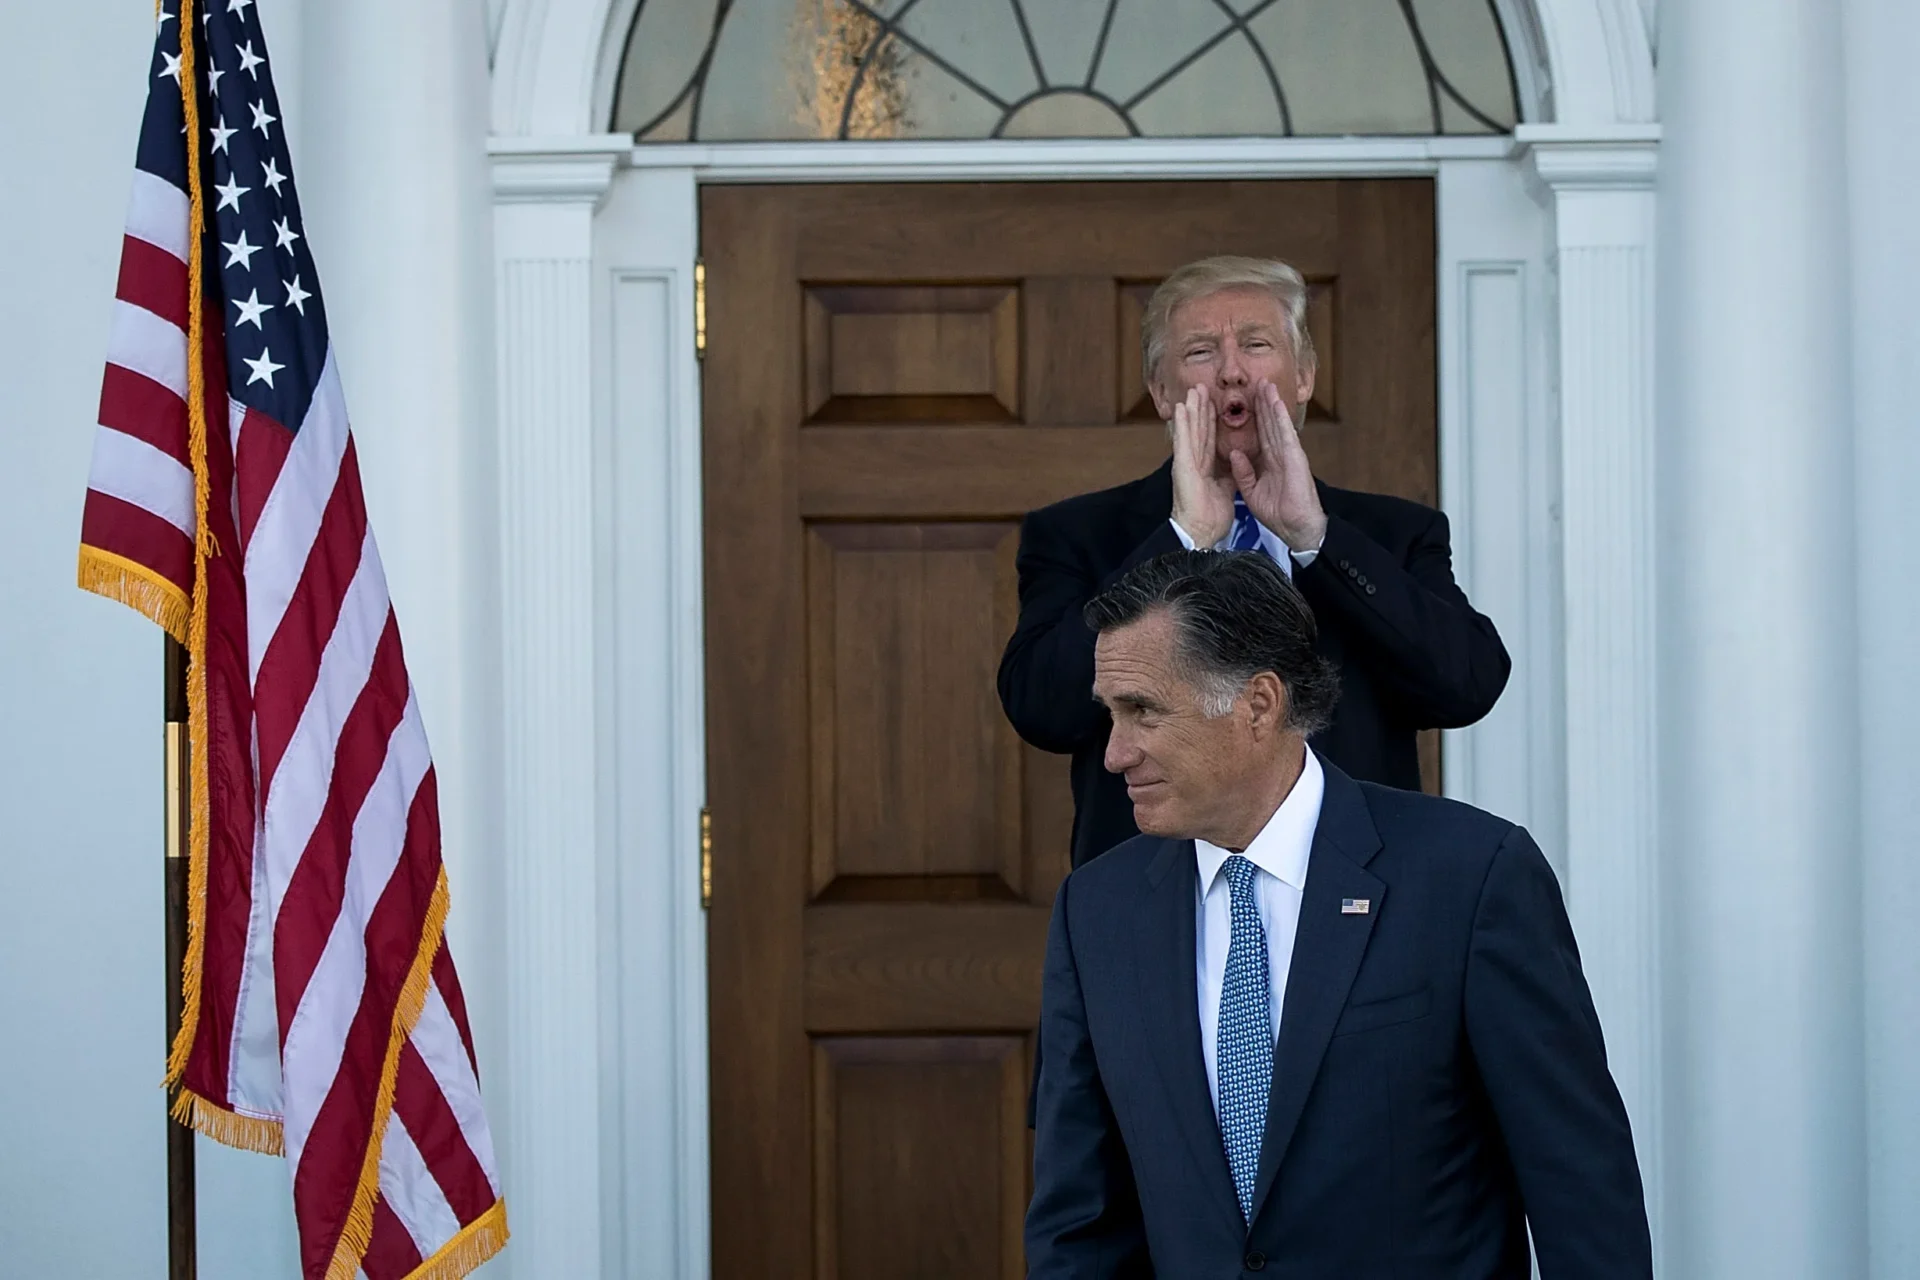 Romney Reveals Why Trump Did Not Attend Debates